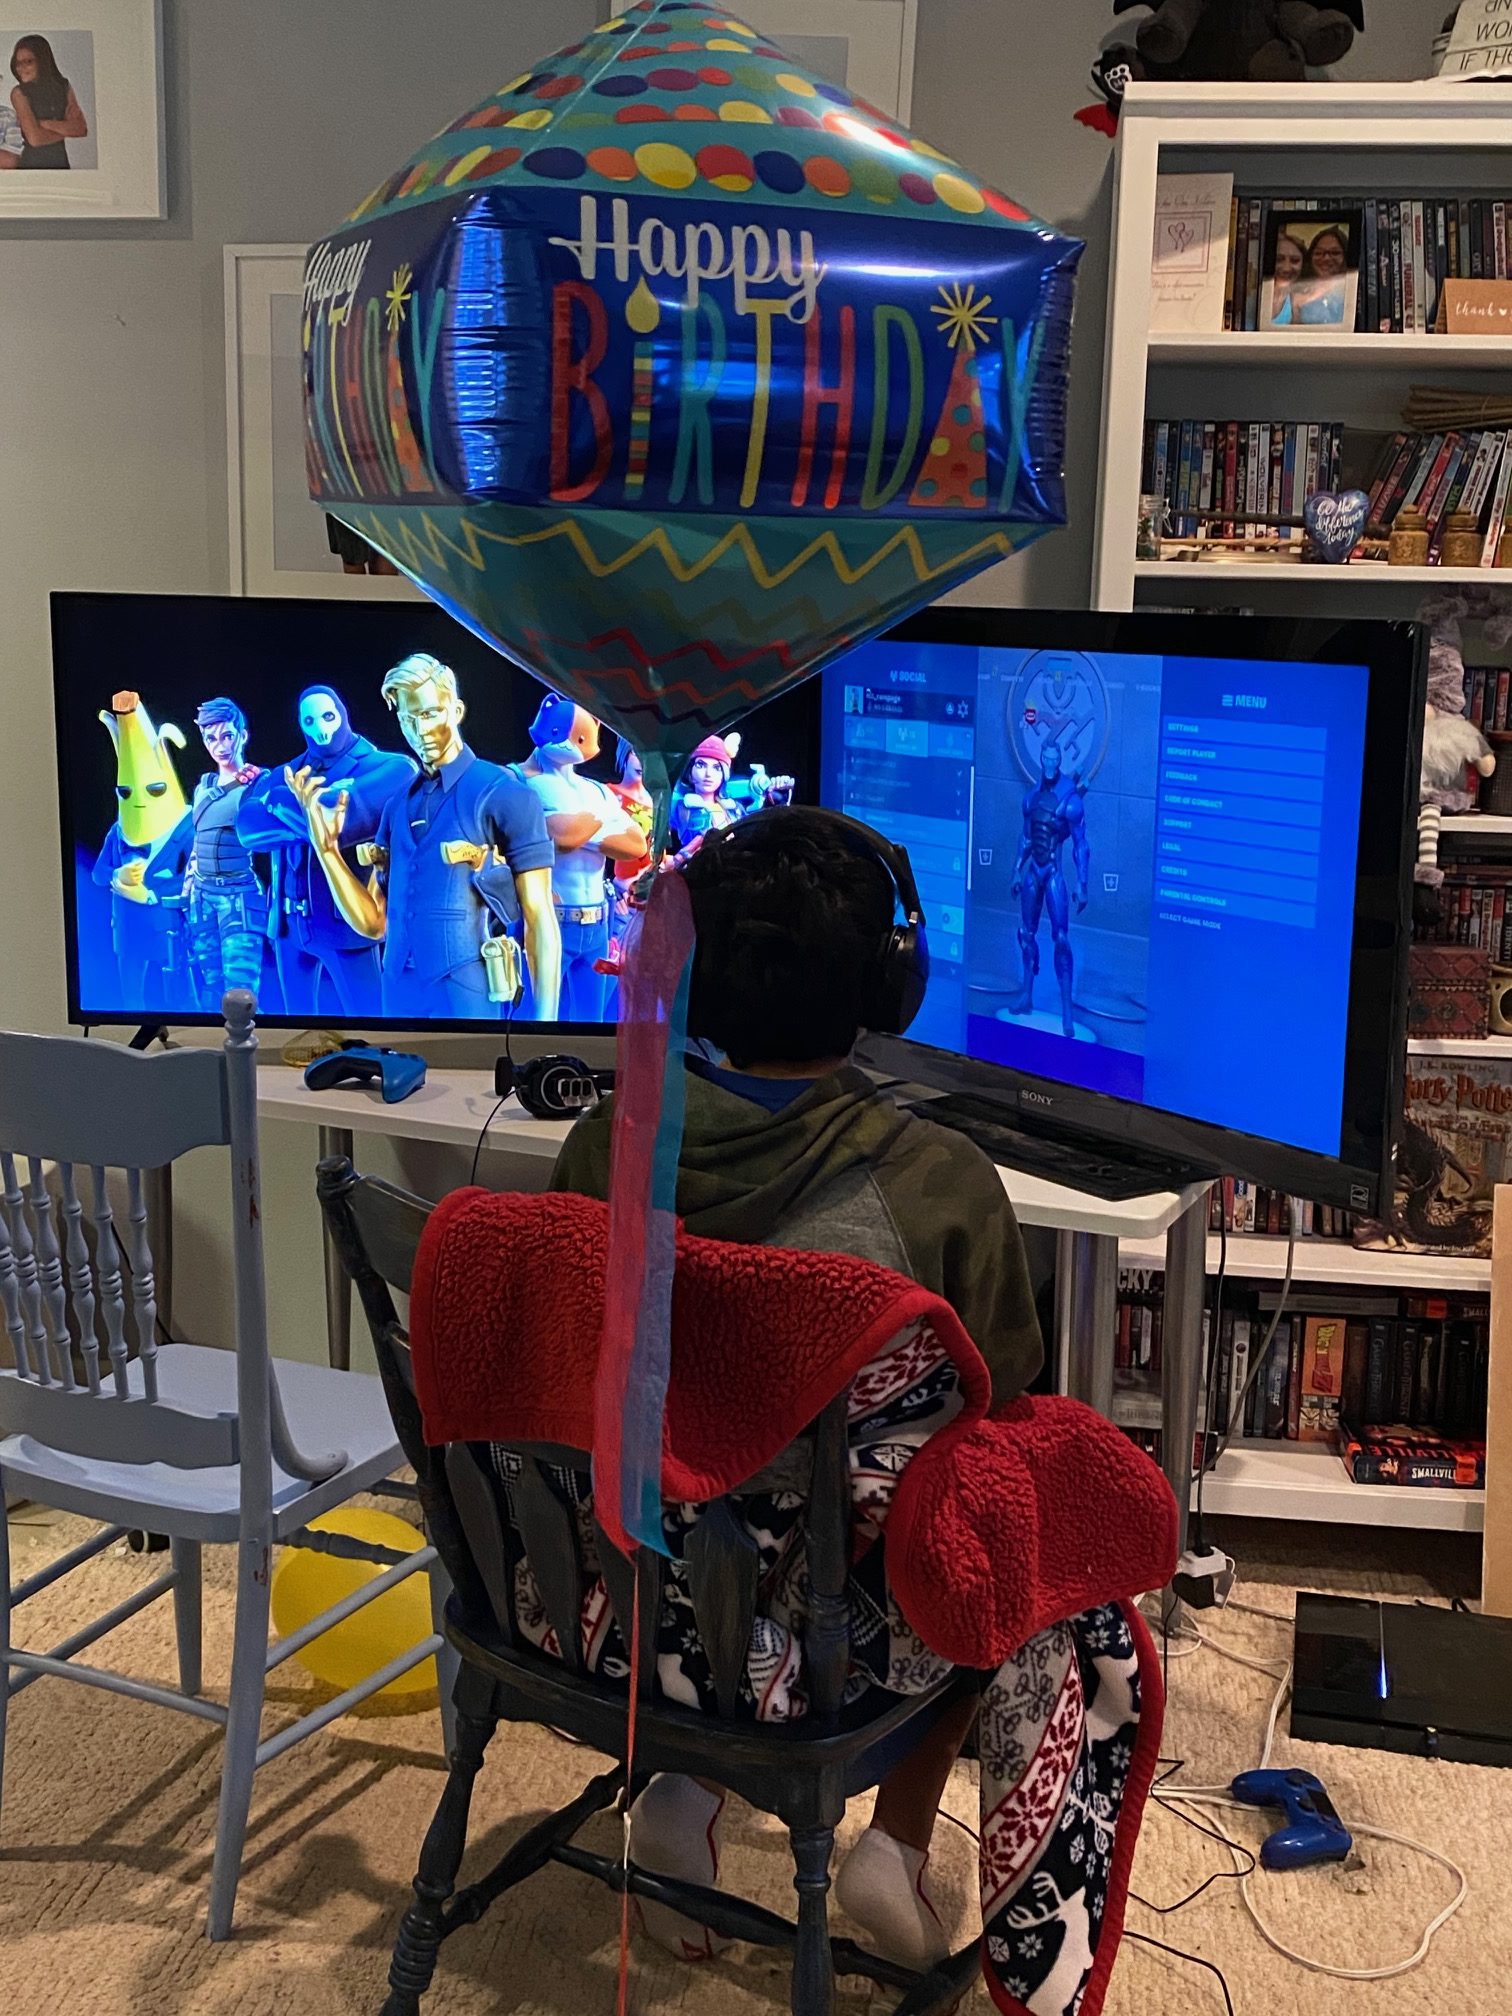 Boy sitting with two televisions and birthday balloon